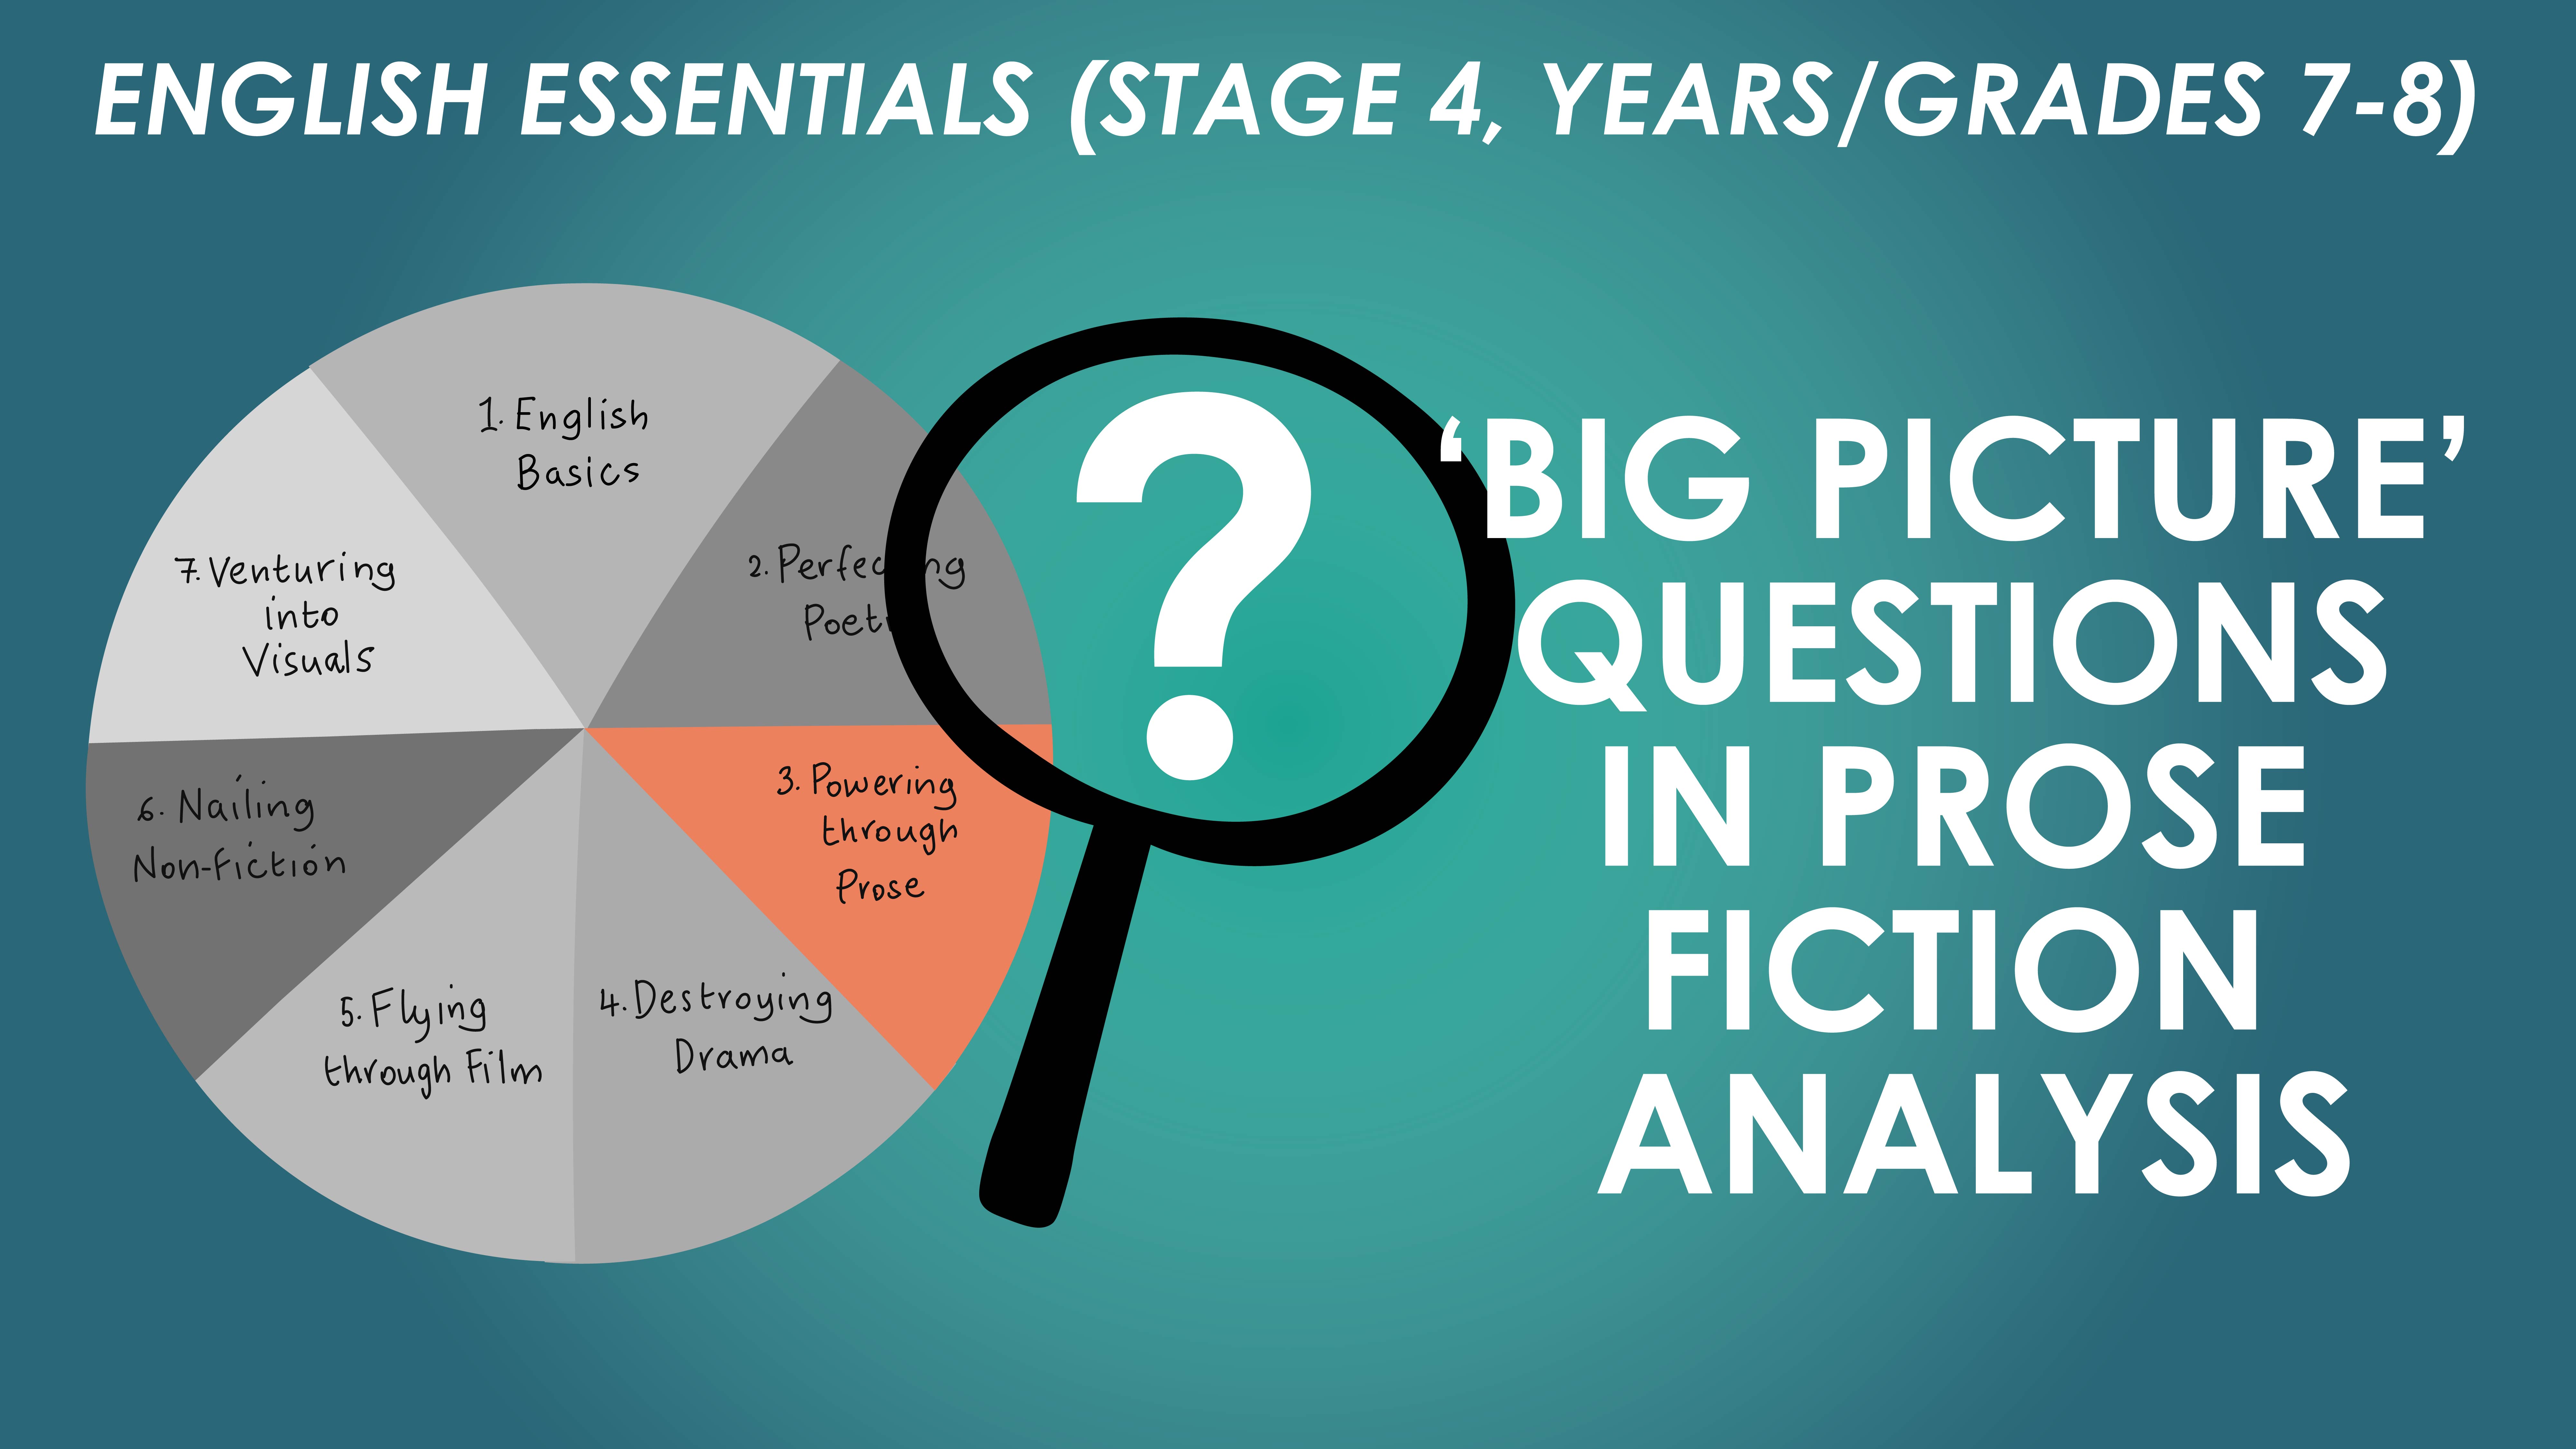 English Essentials - Powering Through Prose - 'Big Picture' Questions in Prose Fiction Analysis (Stage 4, Years/Grades 7-8)